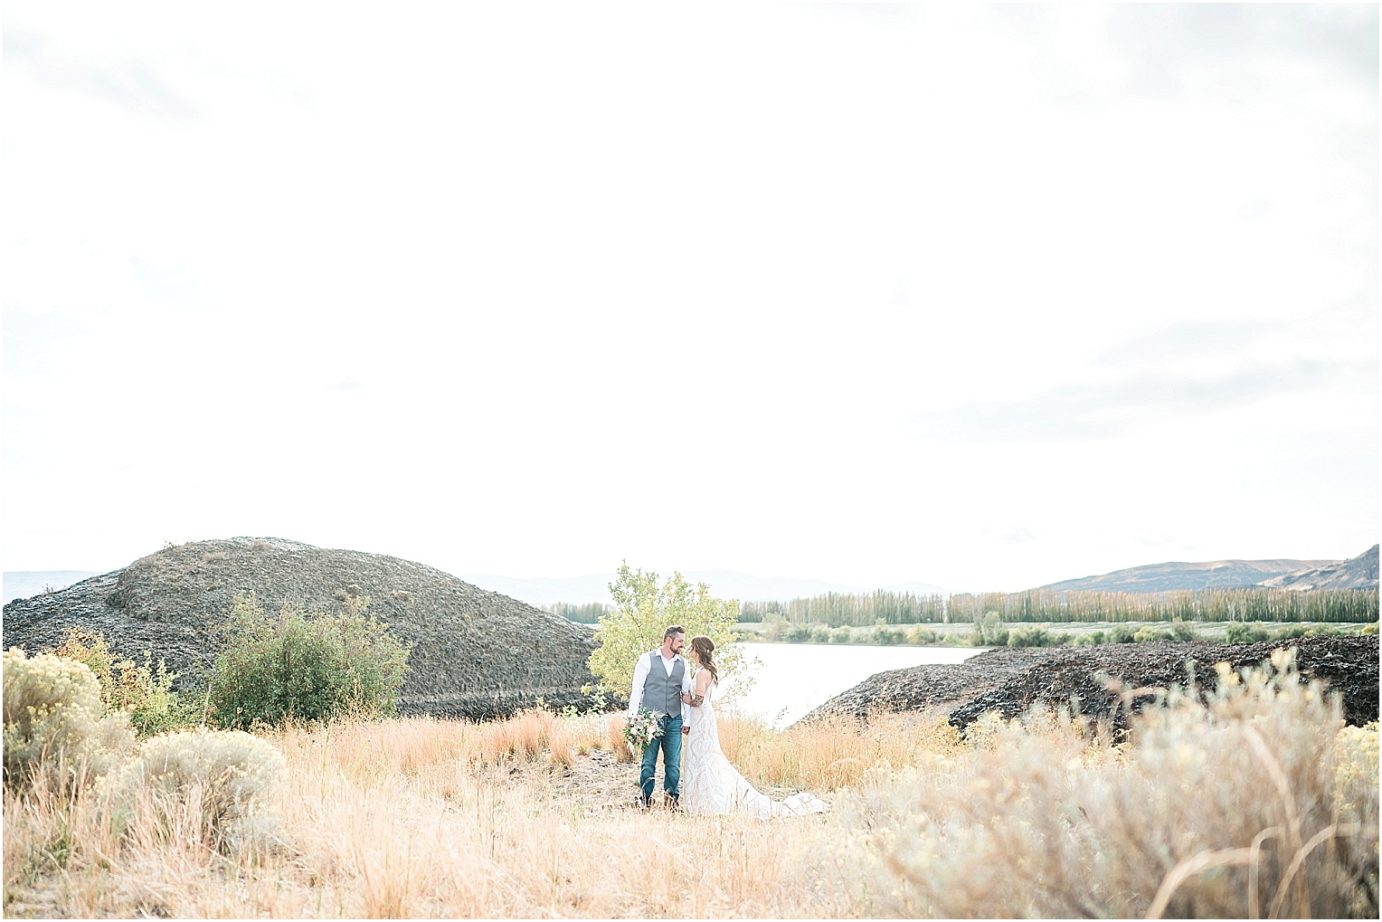 Eastern Washington Elopement Photographer Mike and Carley standing by the river